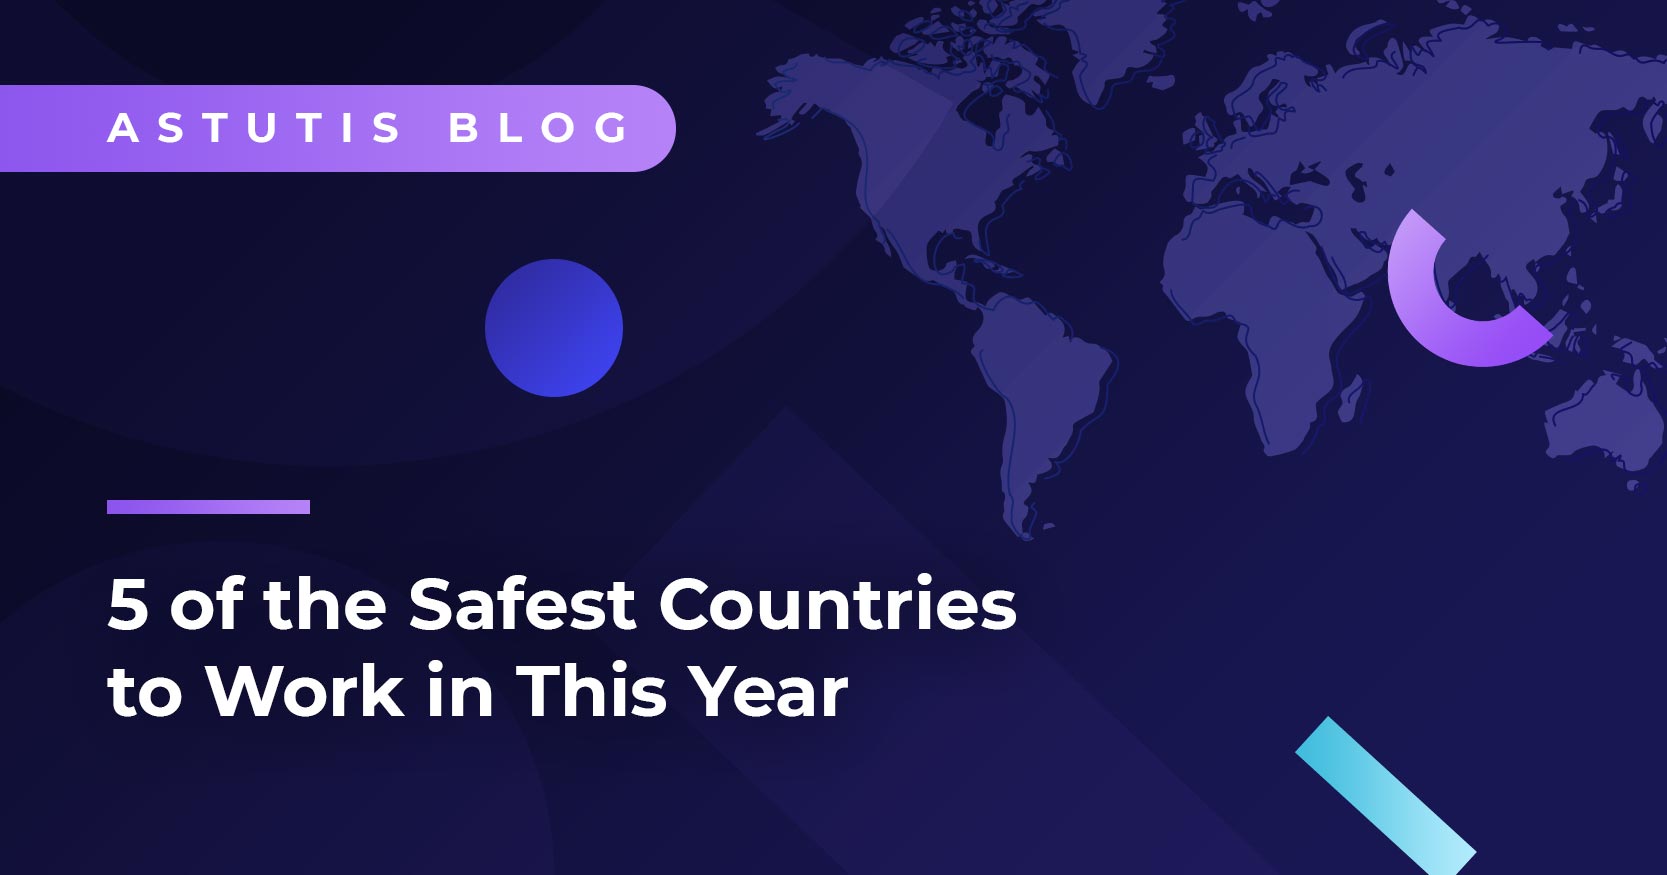 5 of the Safest Countries to Work in This Year Image